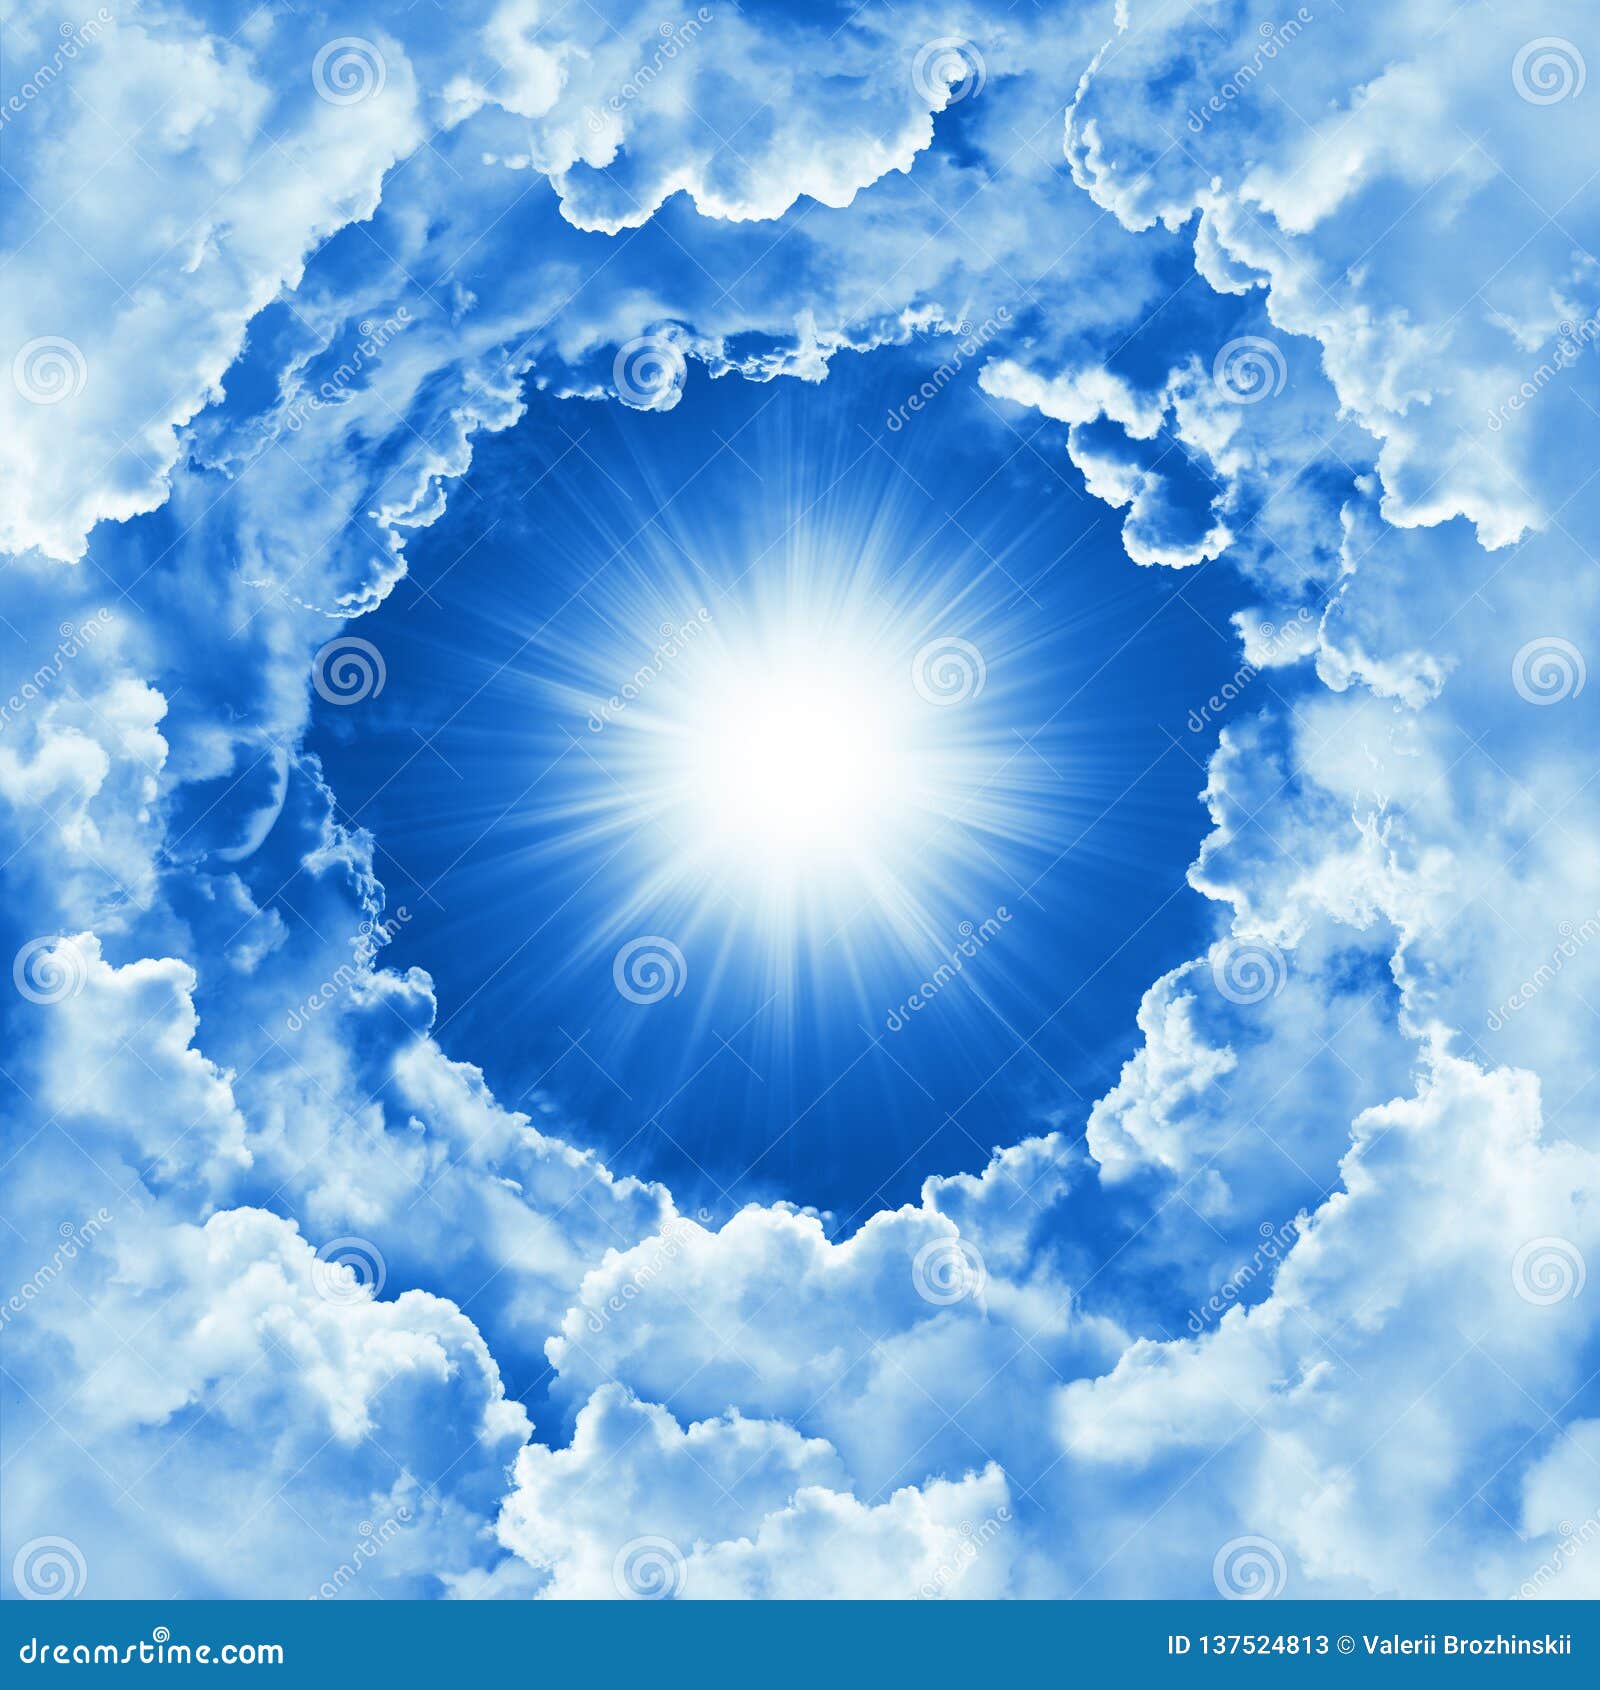 sky with beautiful cloud and sunshine. religion concept heavenly sky background. sunny day, divine shining heaven, light, peaceful